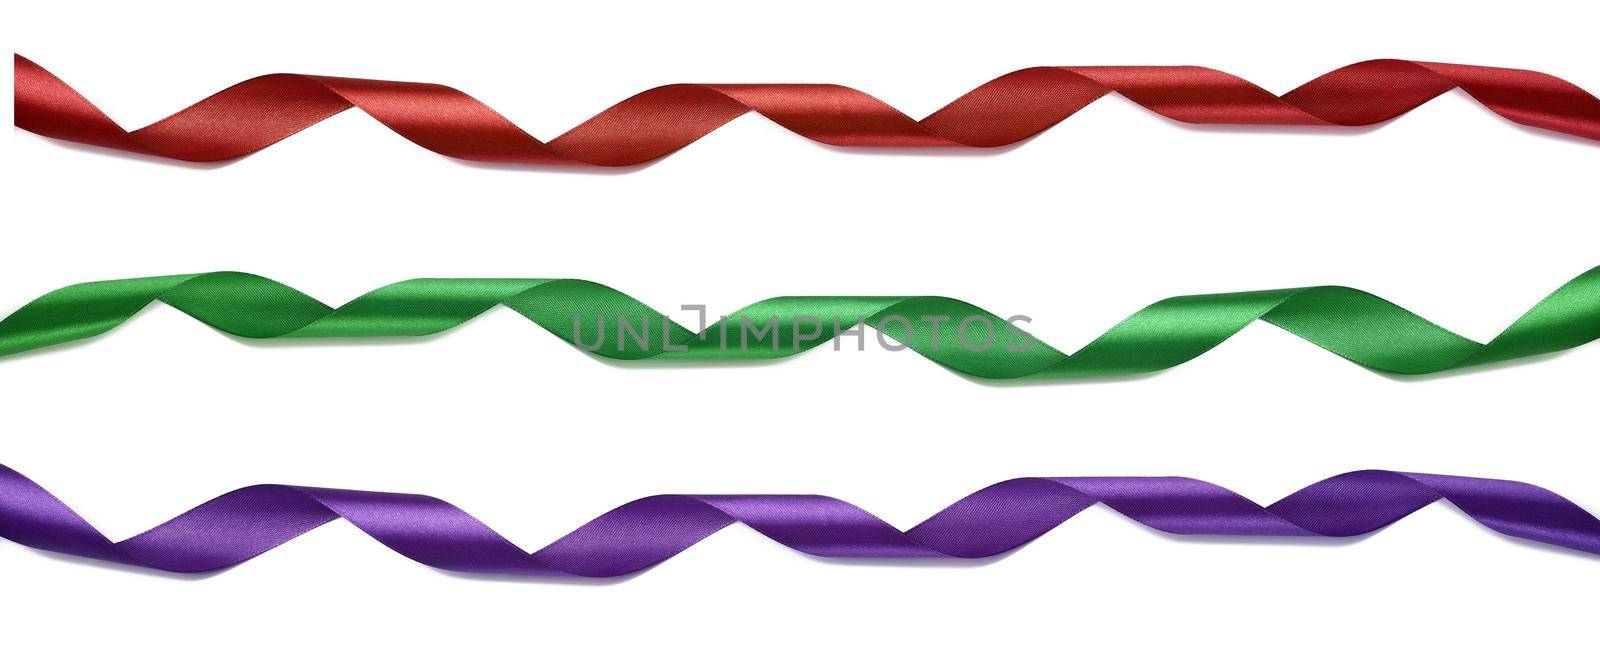 Twisted silk red, blue and purple ribbons for decoration by ndanko